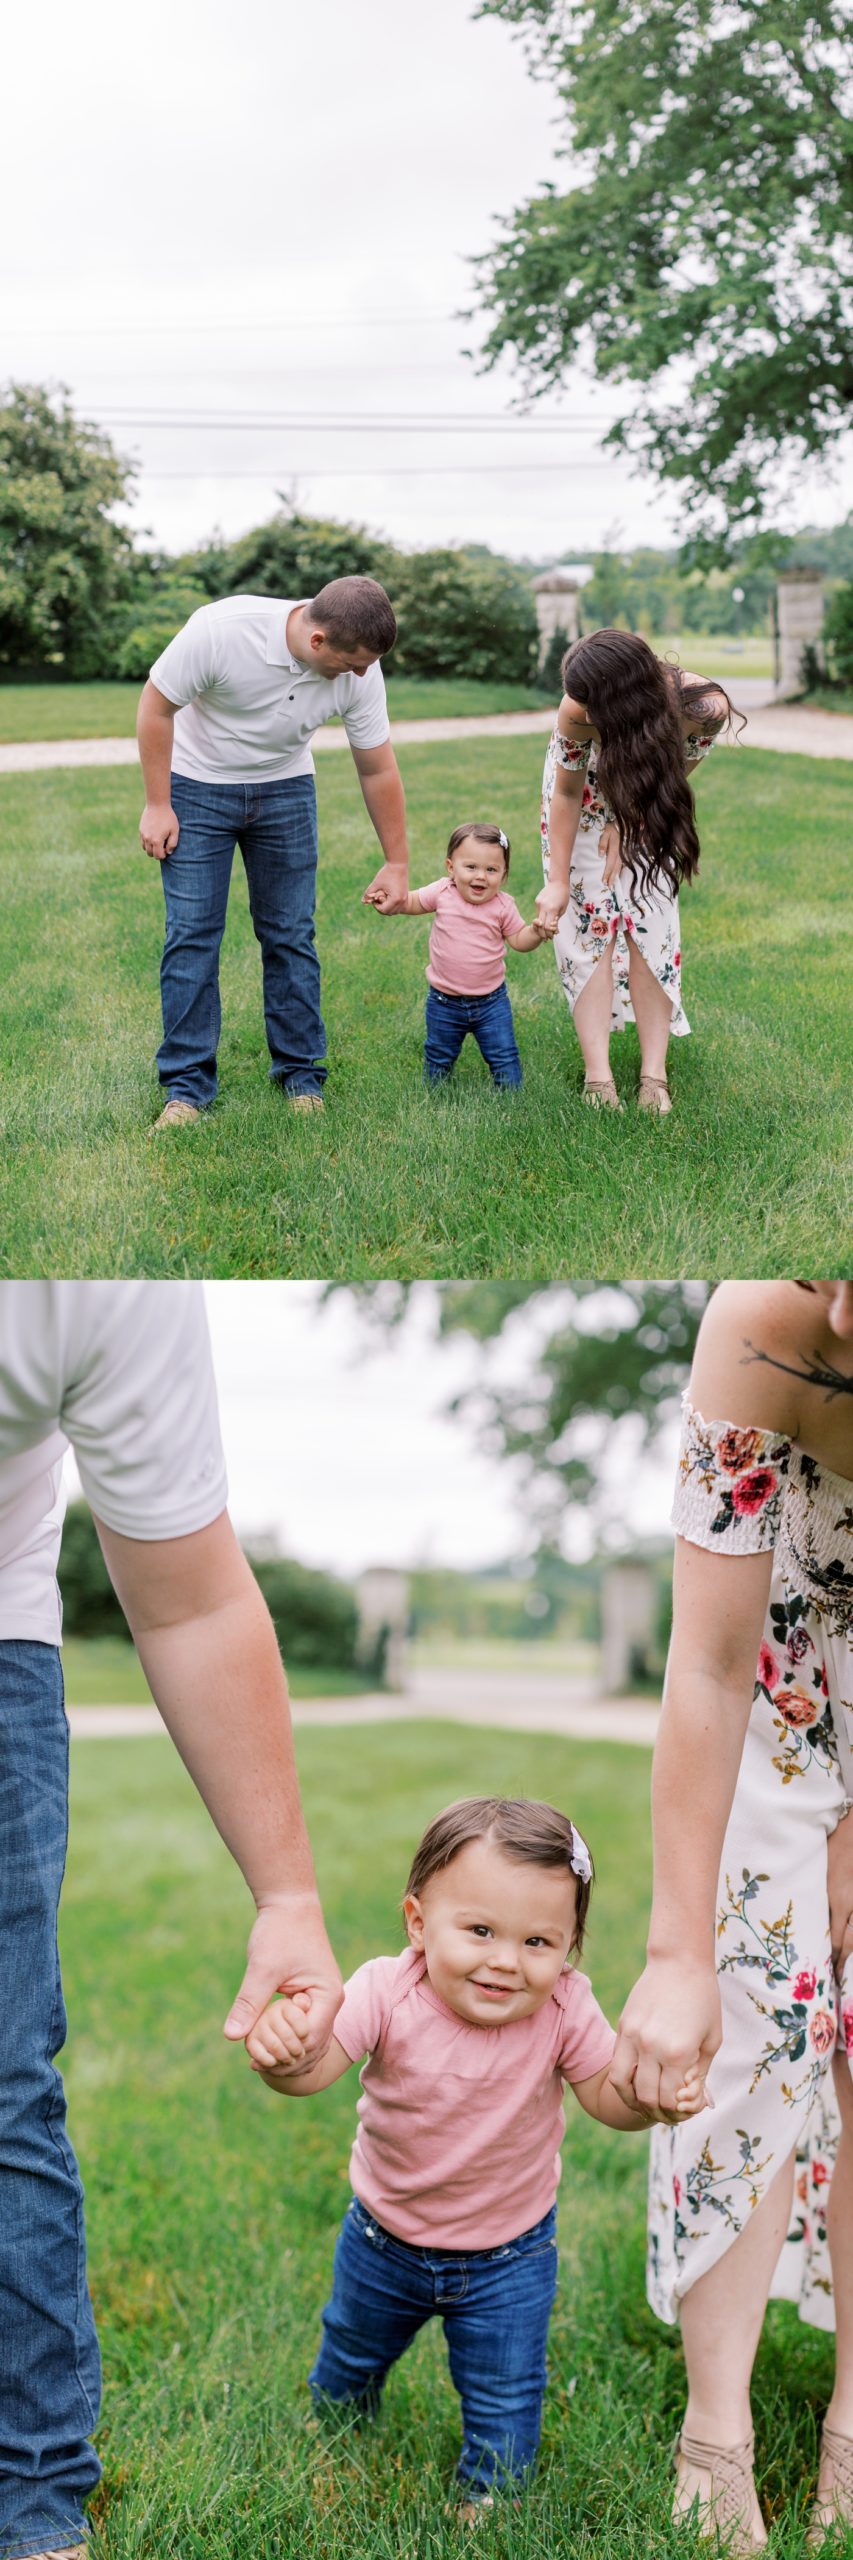 Engagement session with their daughter